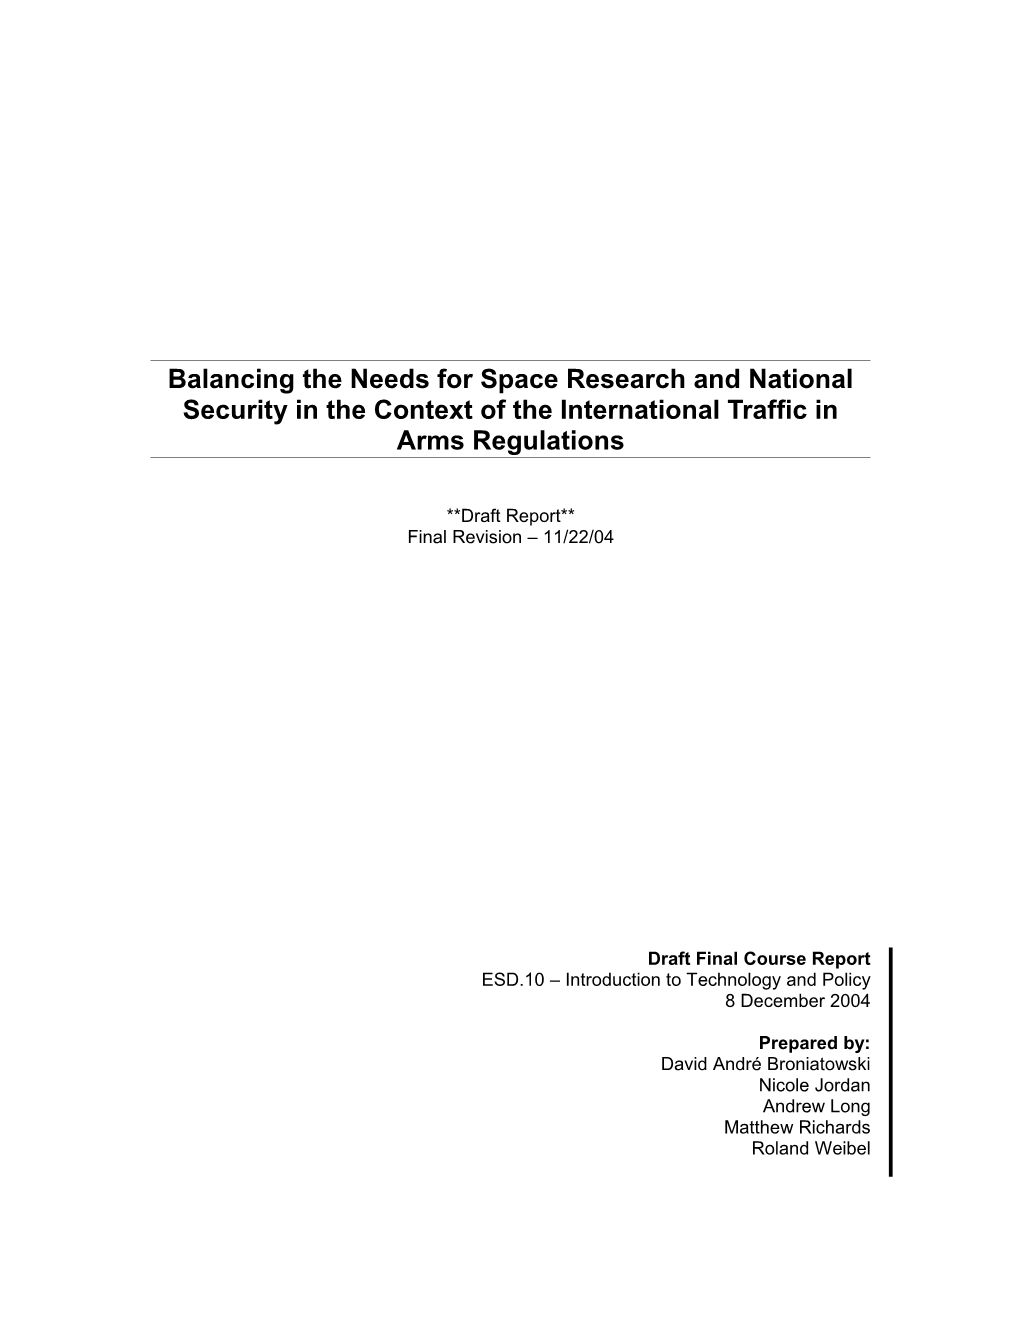 Balancing the Needs for Space Research and National Security in the Context of The